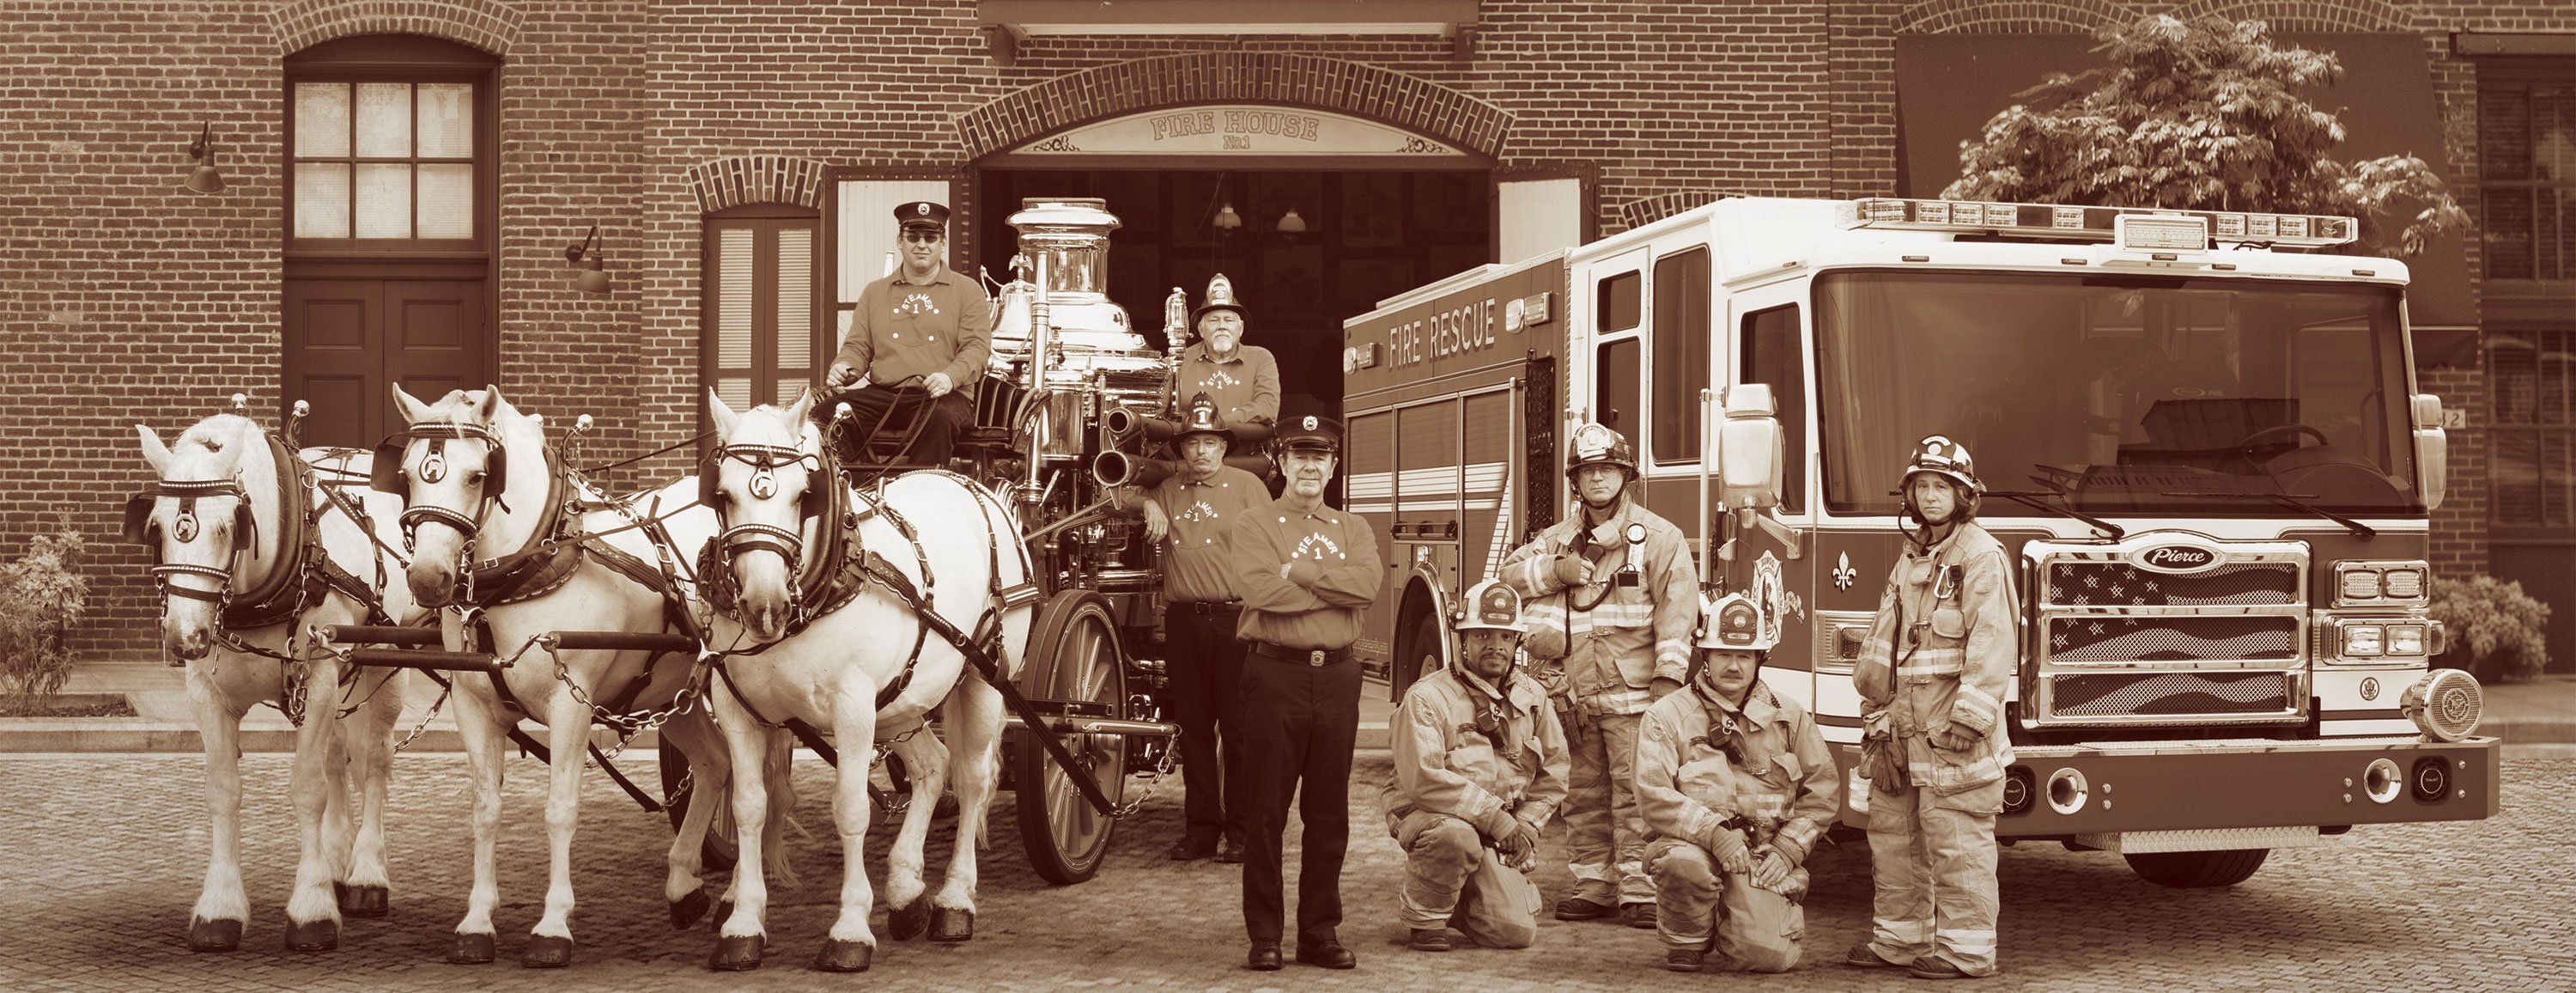 Firefighters next to a Pierce Fire Truck and white horses in front of a Fire Station.